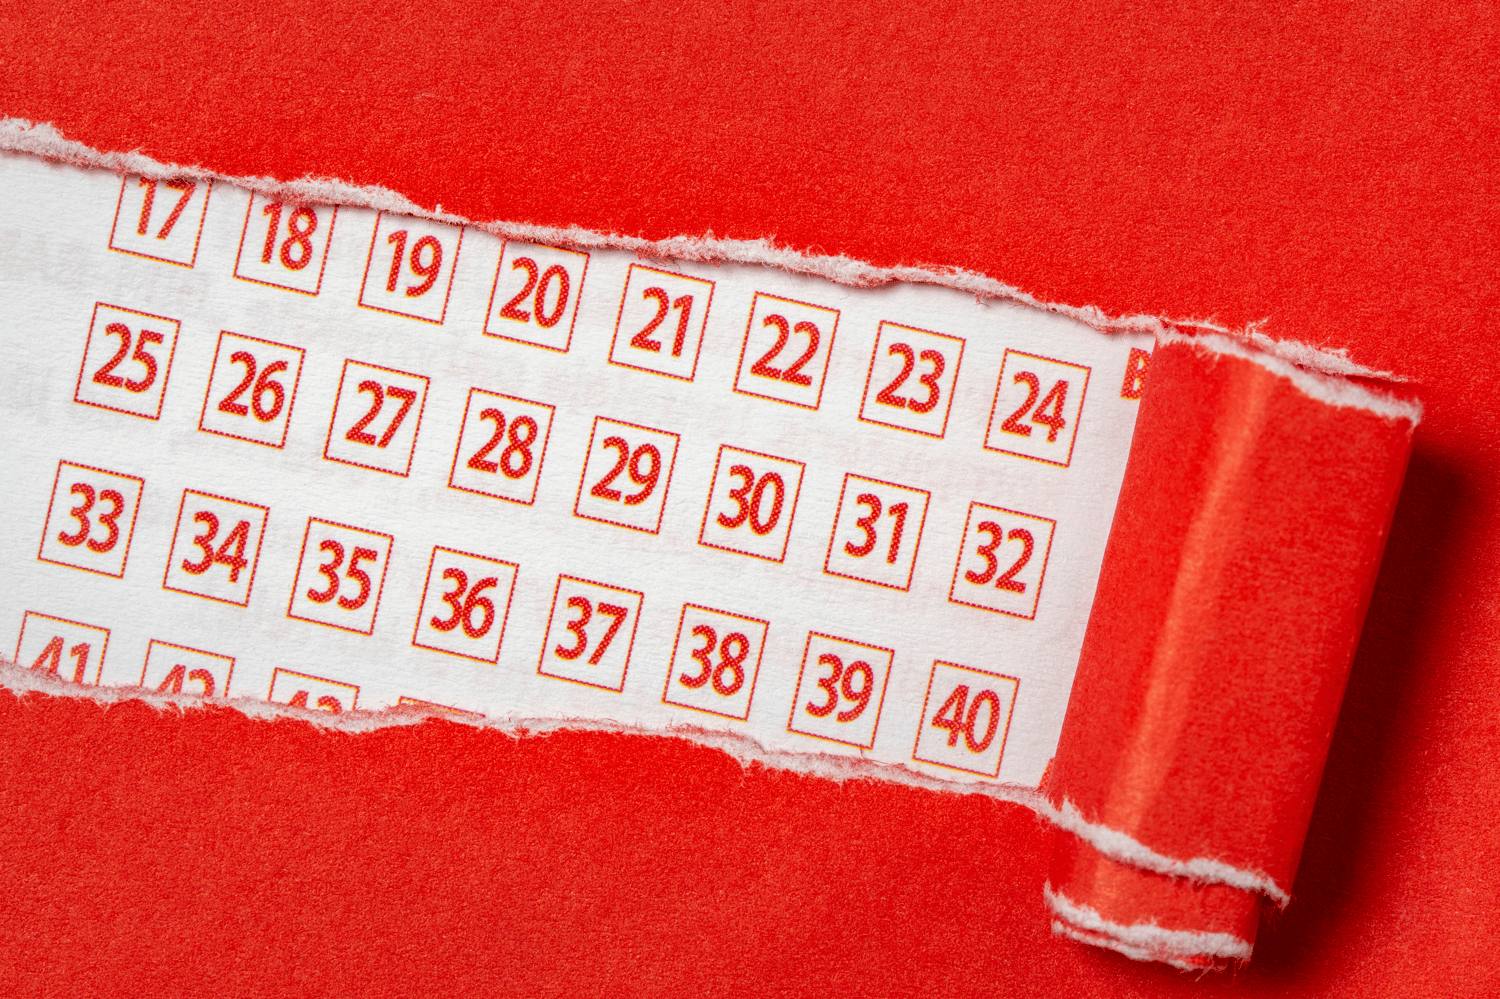 Red paper torn to reveal lottery ticket numbers, representing lottery service providers Woods Valldata